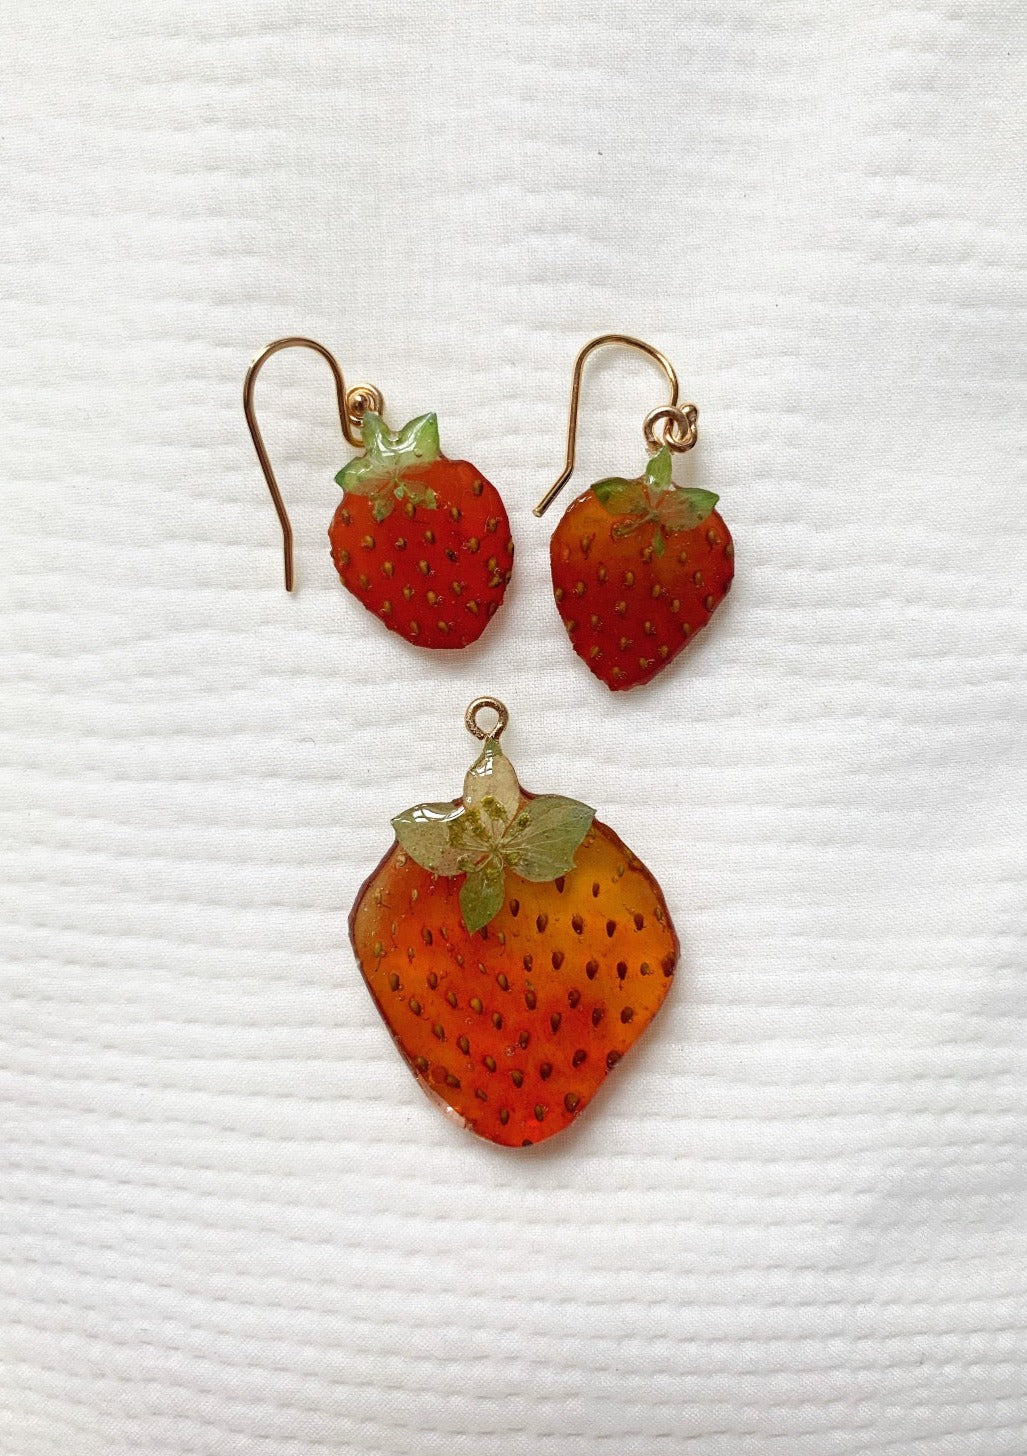 Two Miniature Strawberry earrings next to a regular Strawberry earring